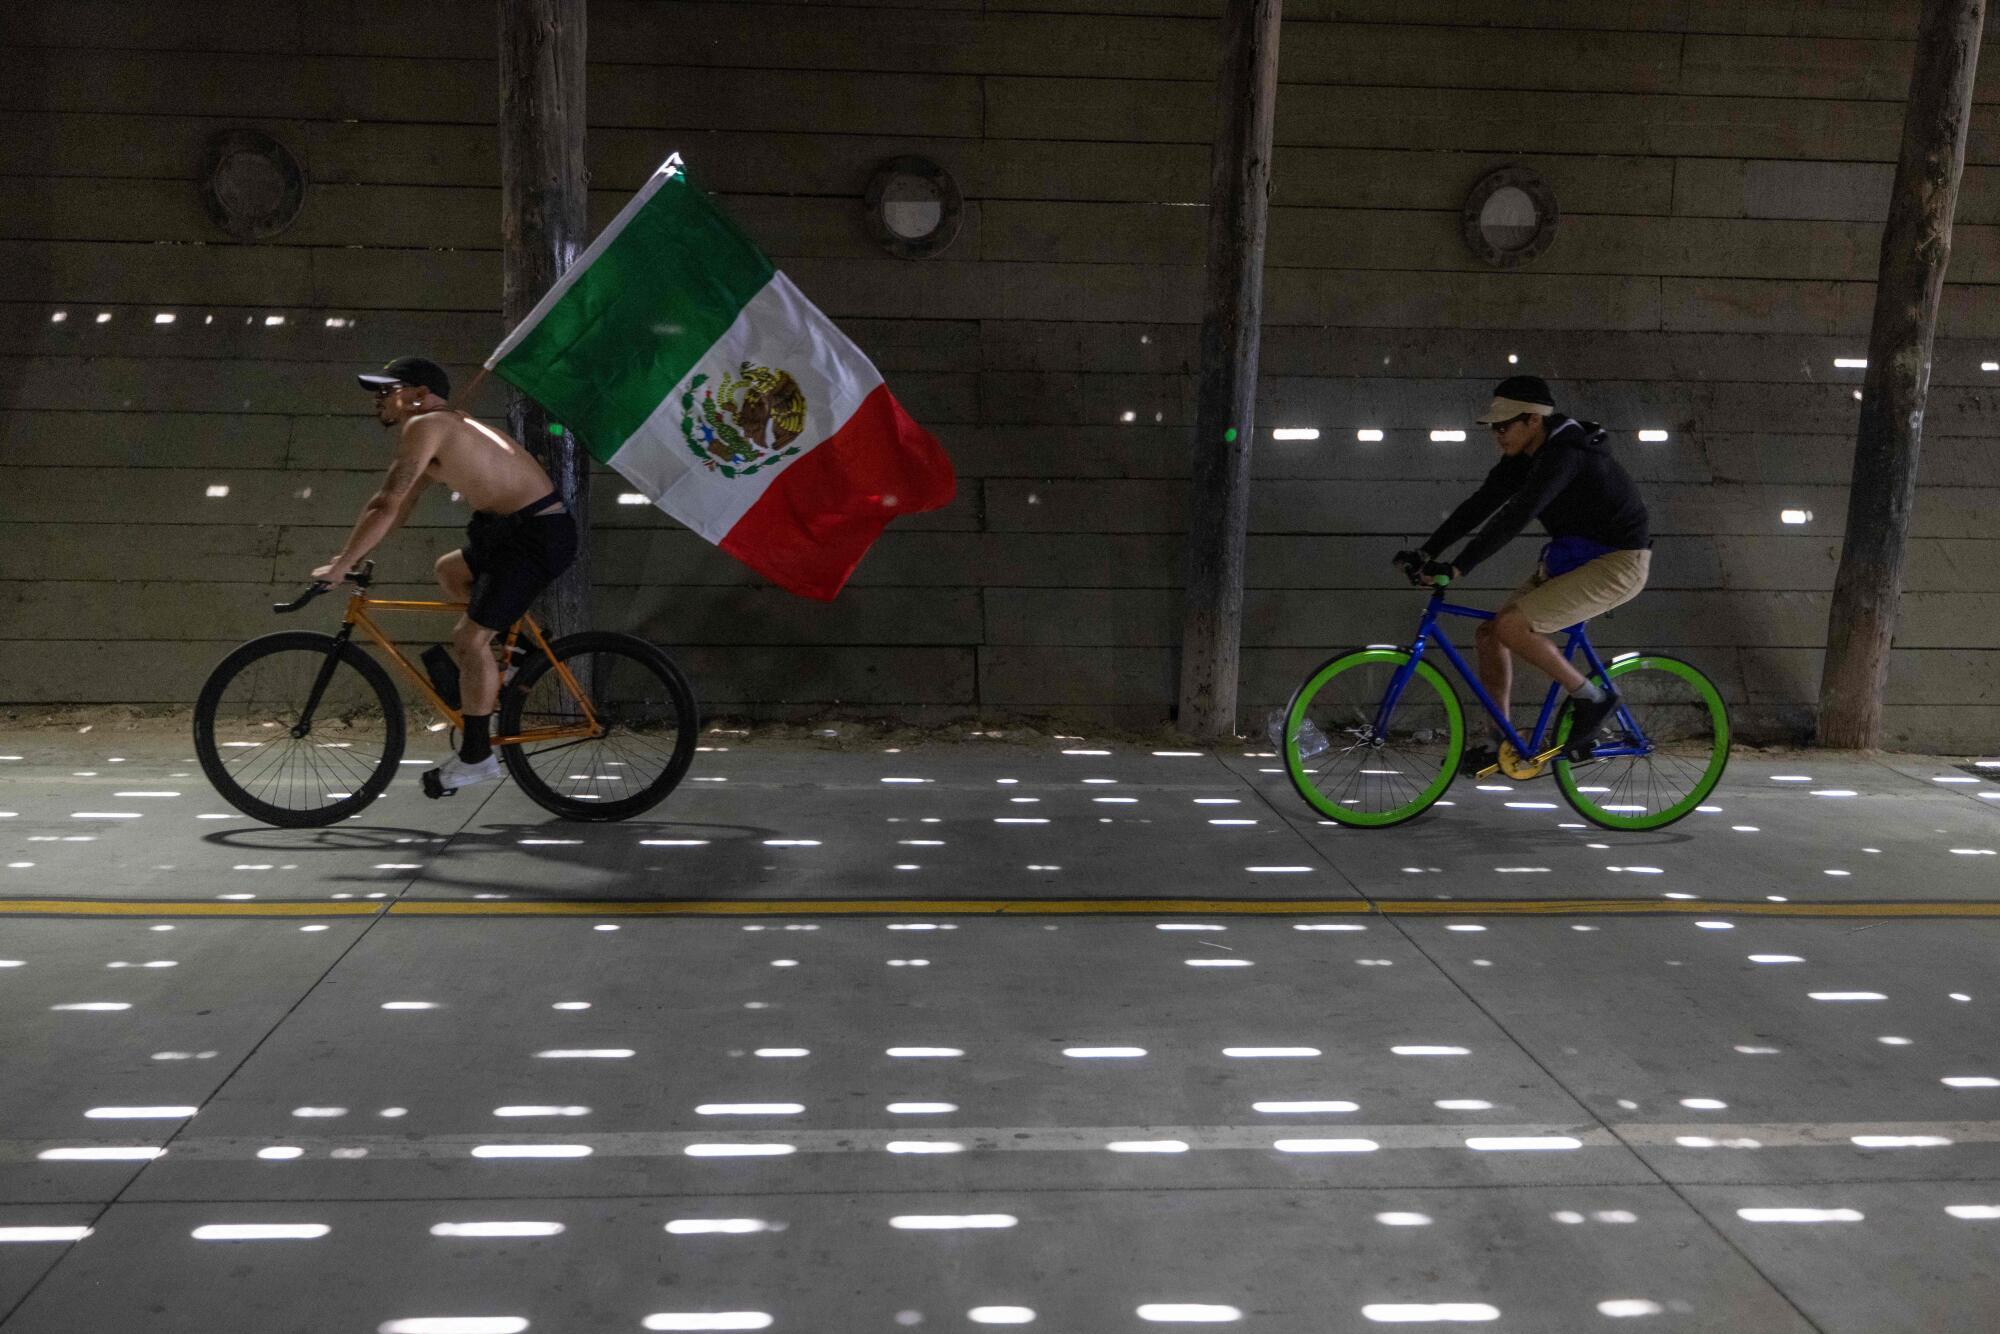 A man flies the flag of Mexico from a bike passing under the Santa Monica Pier.